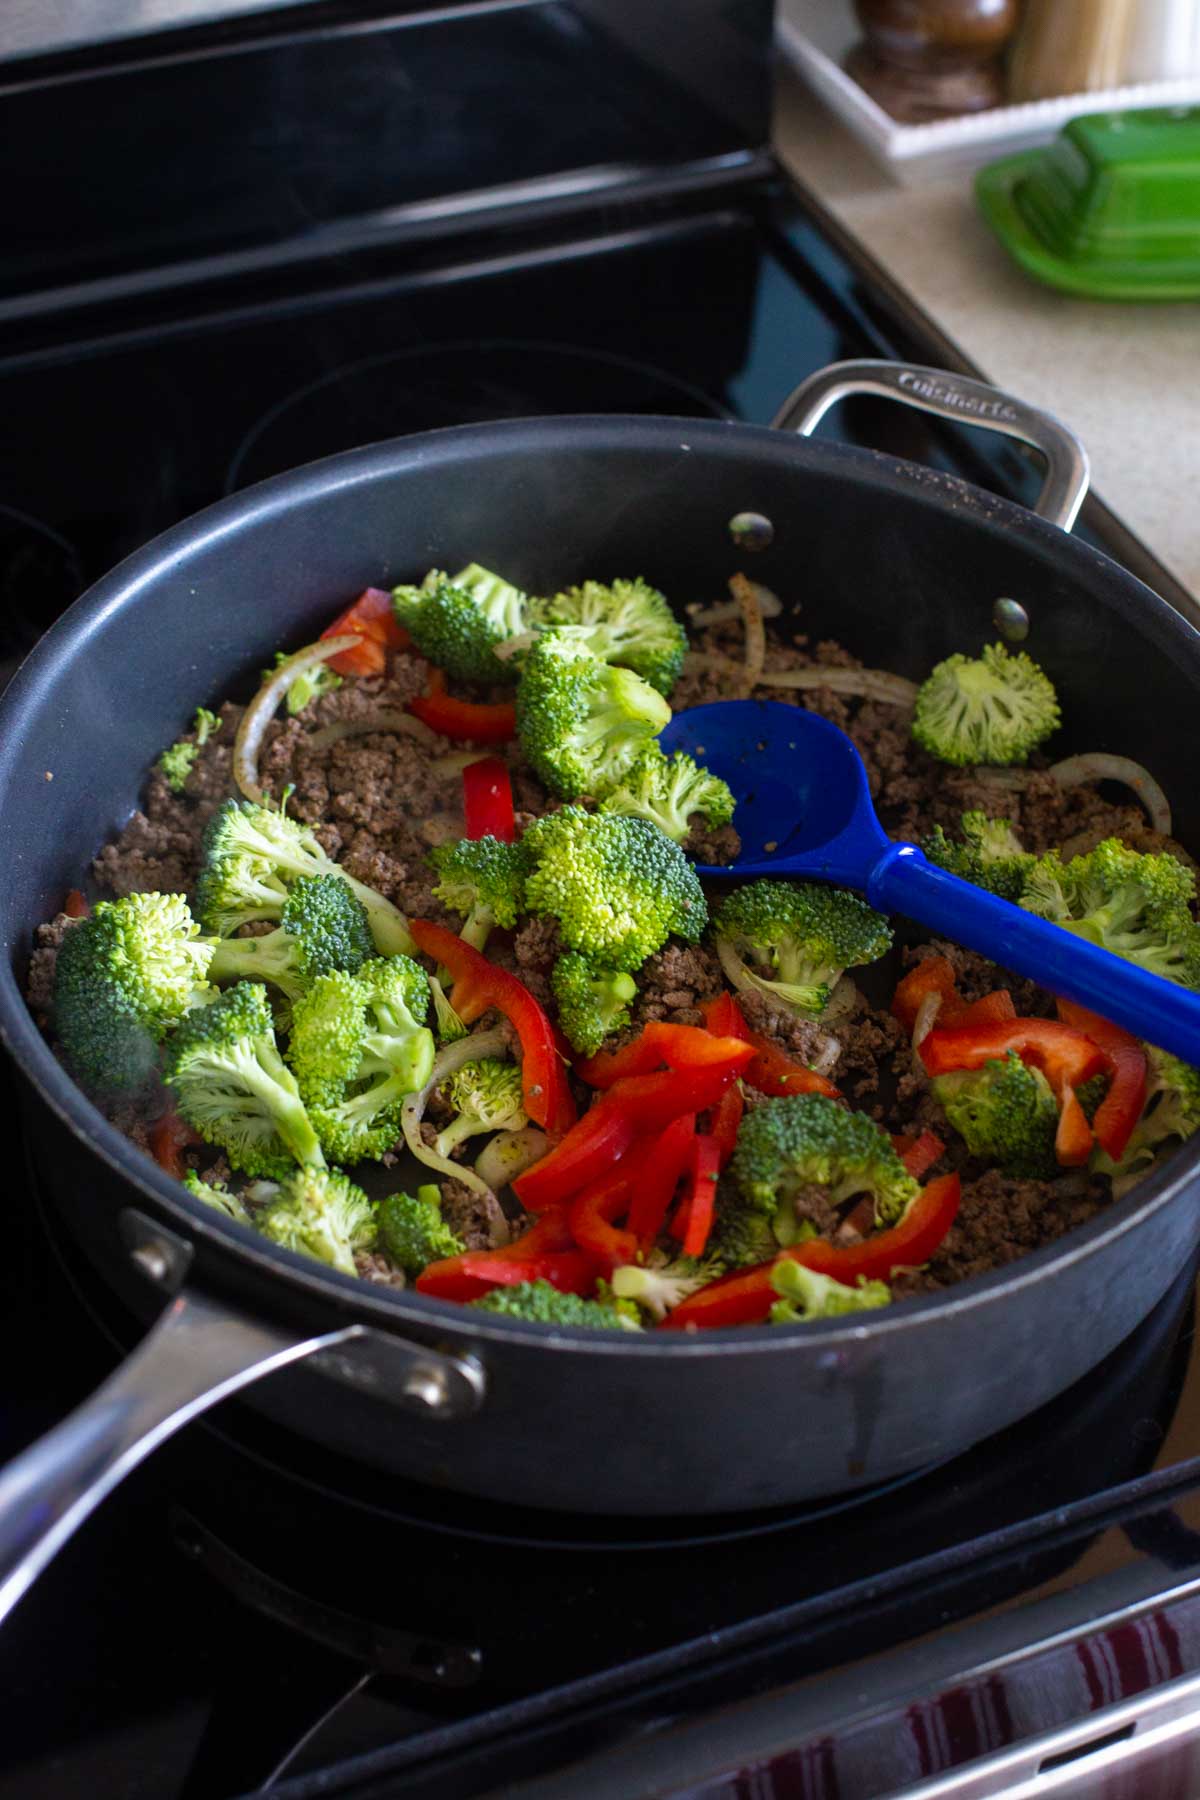 A large skillet is cooking broccoli and red peppers.